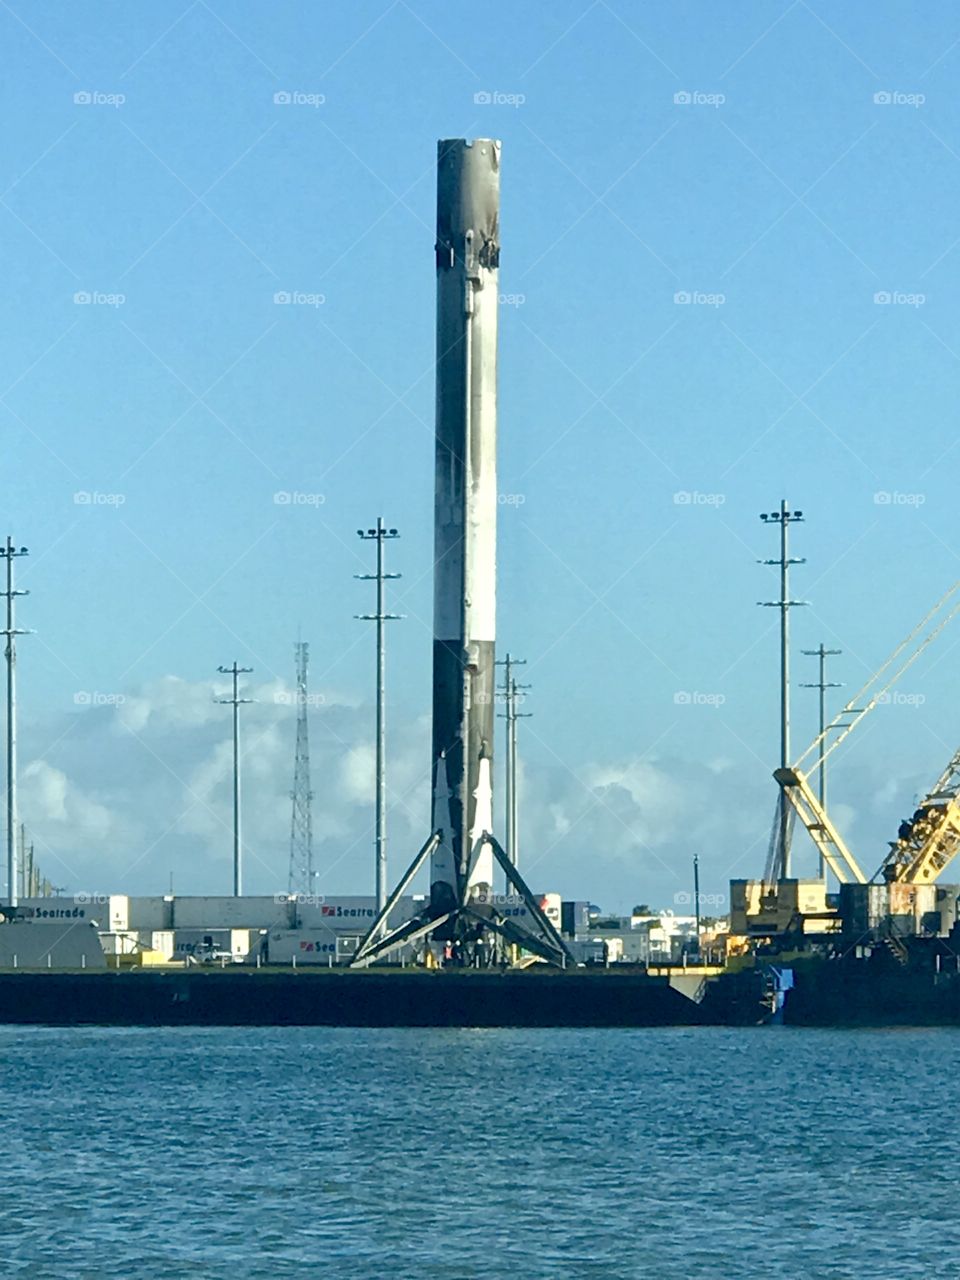 SpaceX Falcon 9 fuselage returning to Port Canaveral after October 11  Rocket Launch On OCISLY 